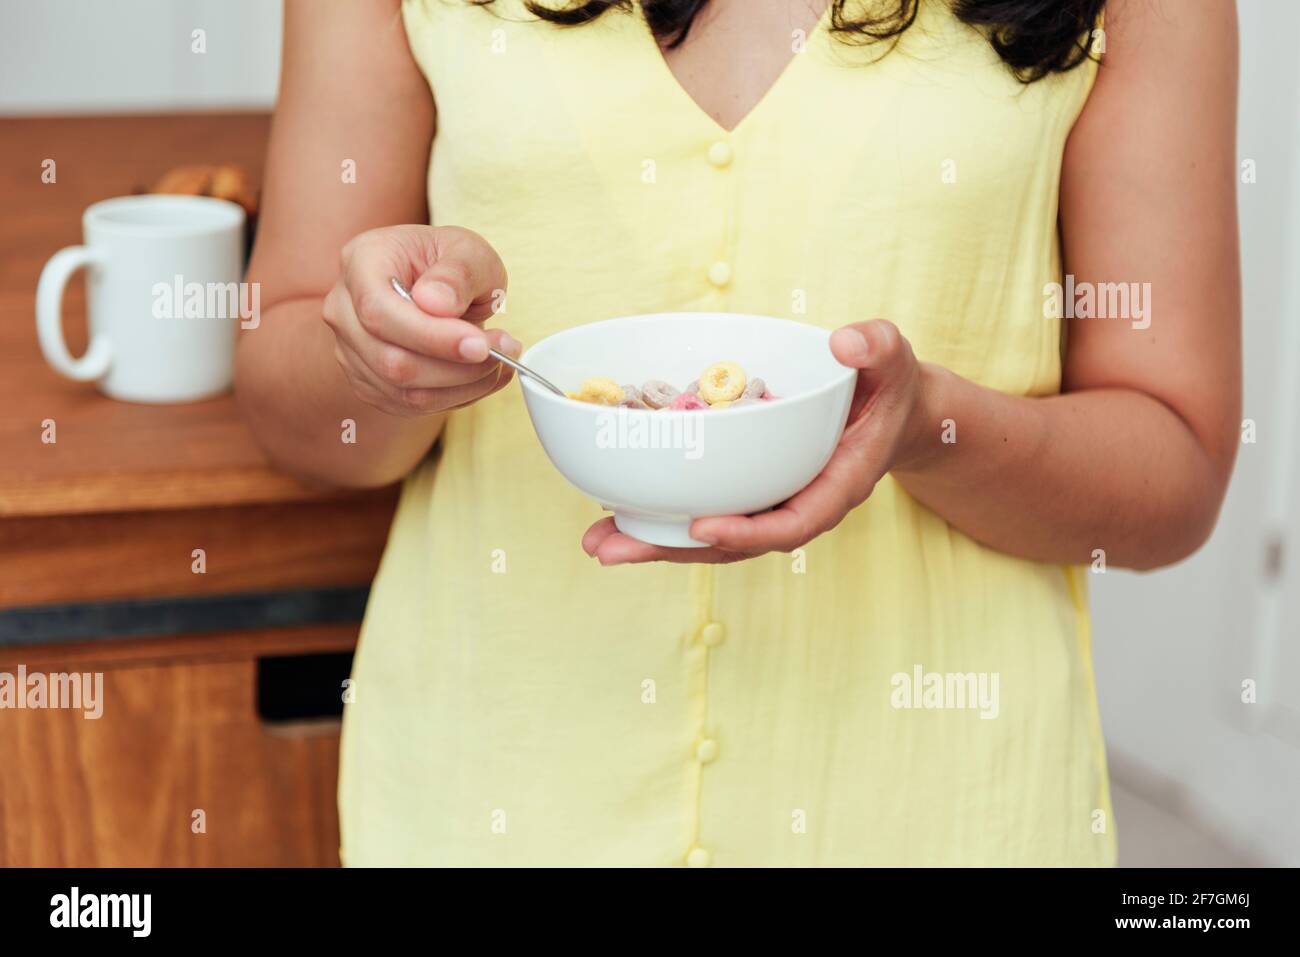 Close-up of a woman having breakfast at home. Domestic life concept. Stock Photo